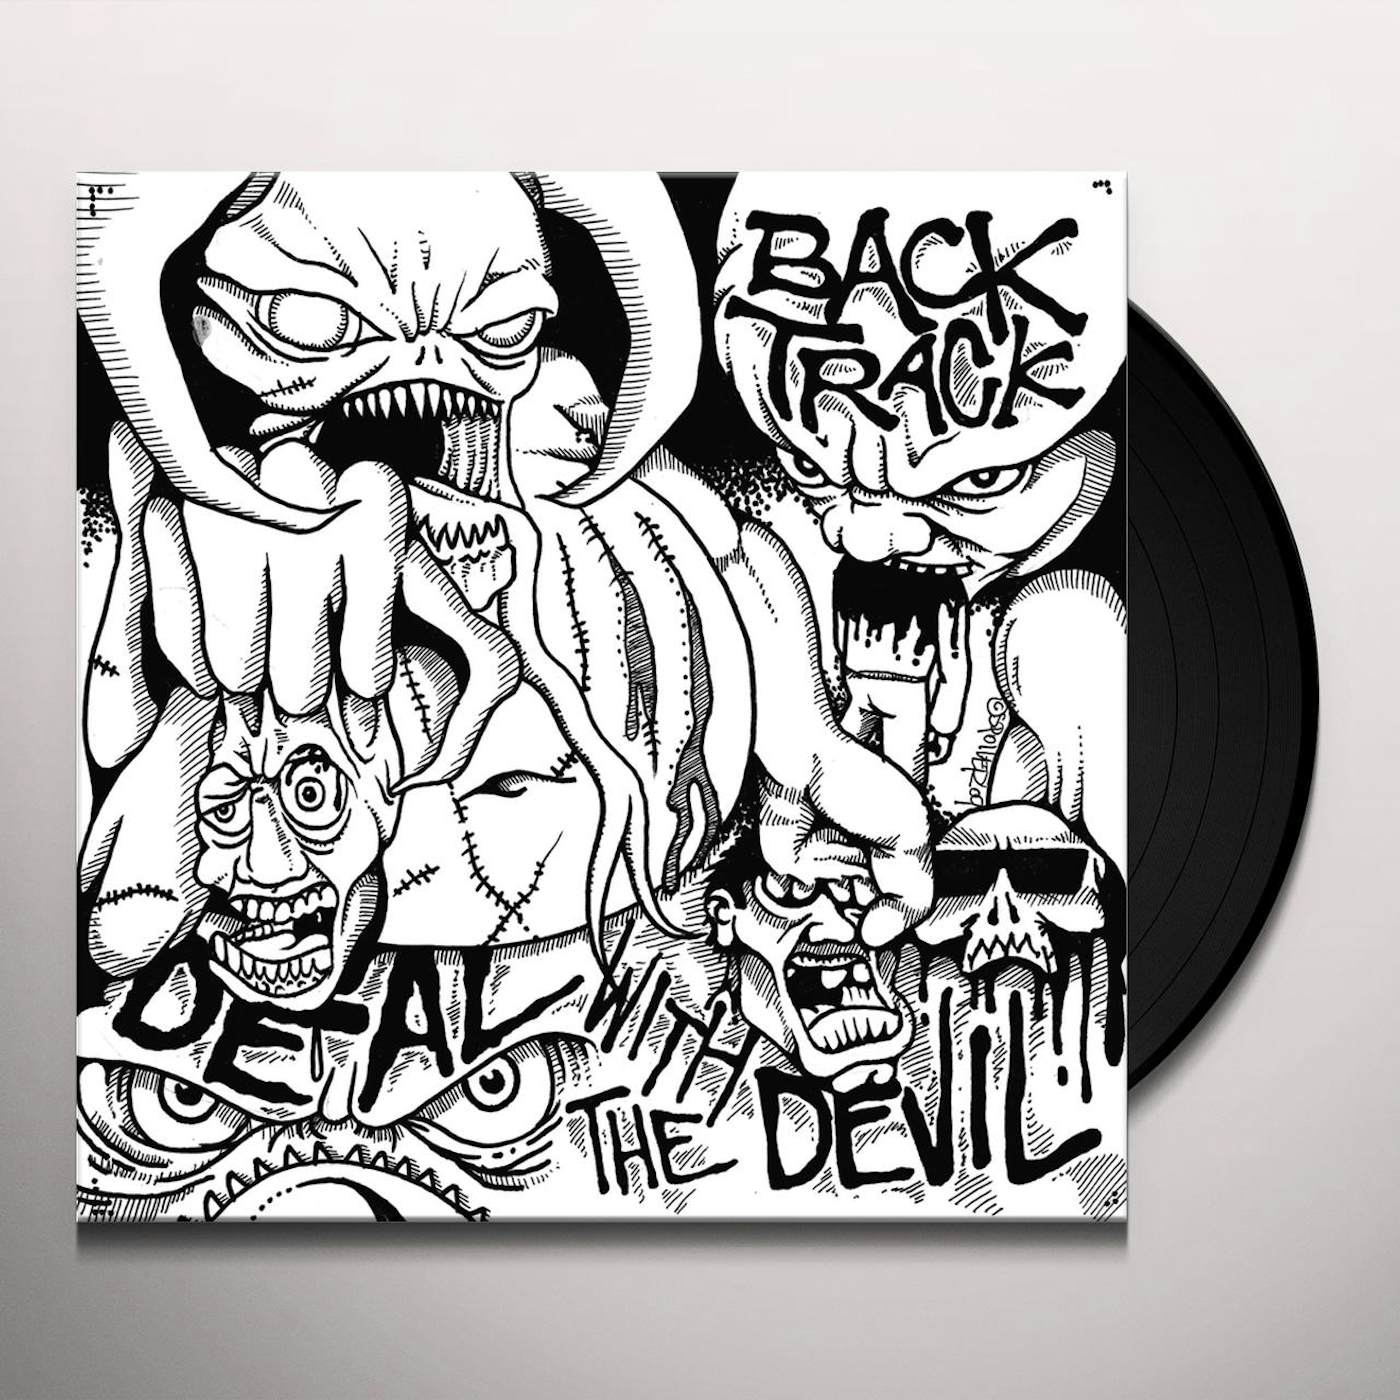 Backtrack Deal With The Devil Vinyl Record